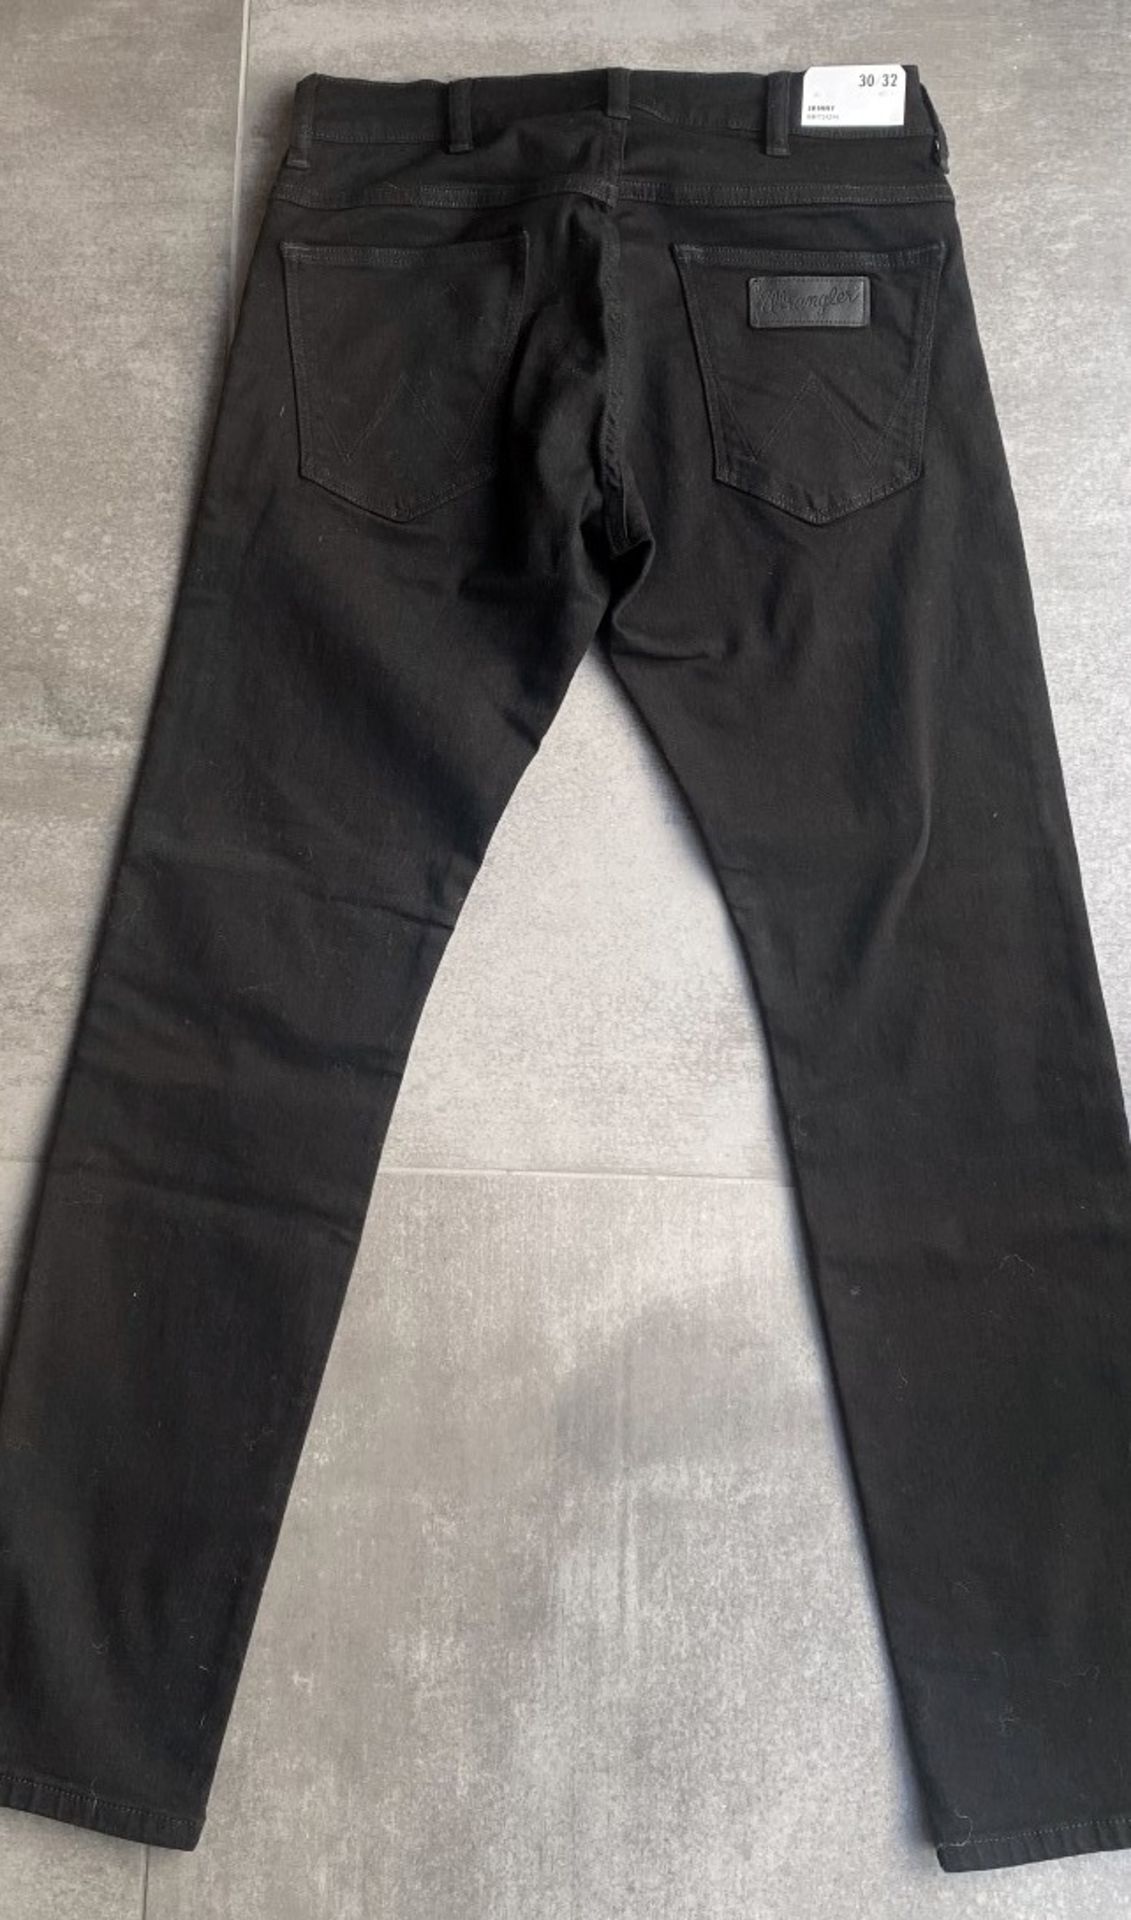 1 x Pair Of Men's Genuine Wrangler Jeans In Black - Size: 30/32 - Preowned, Like New With Tags - - Image 9 of 10